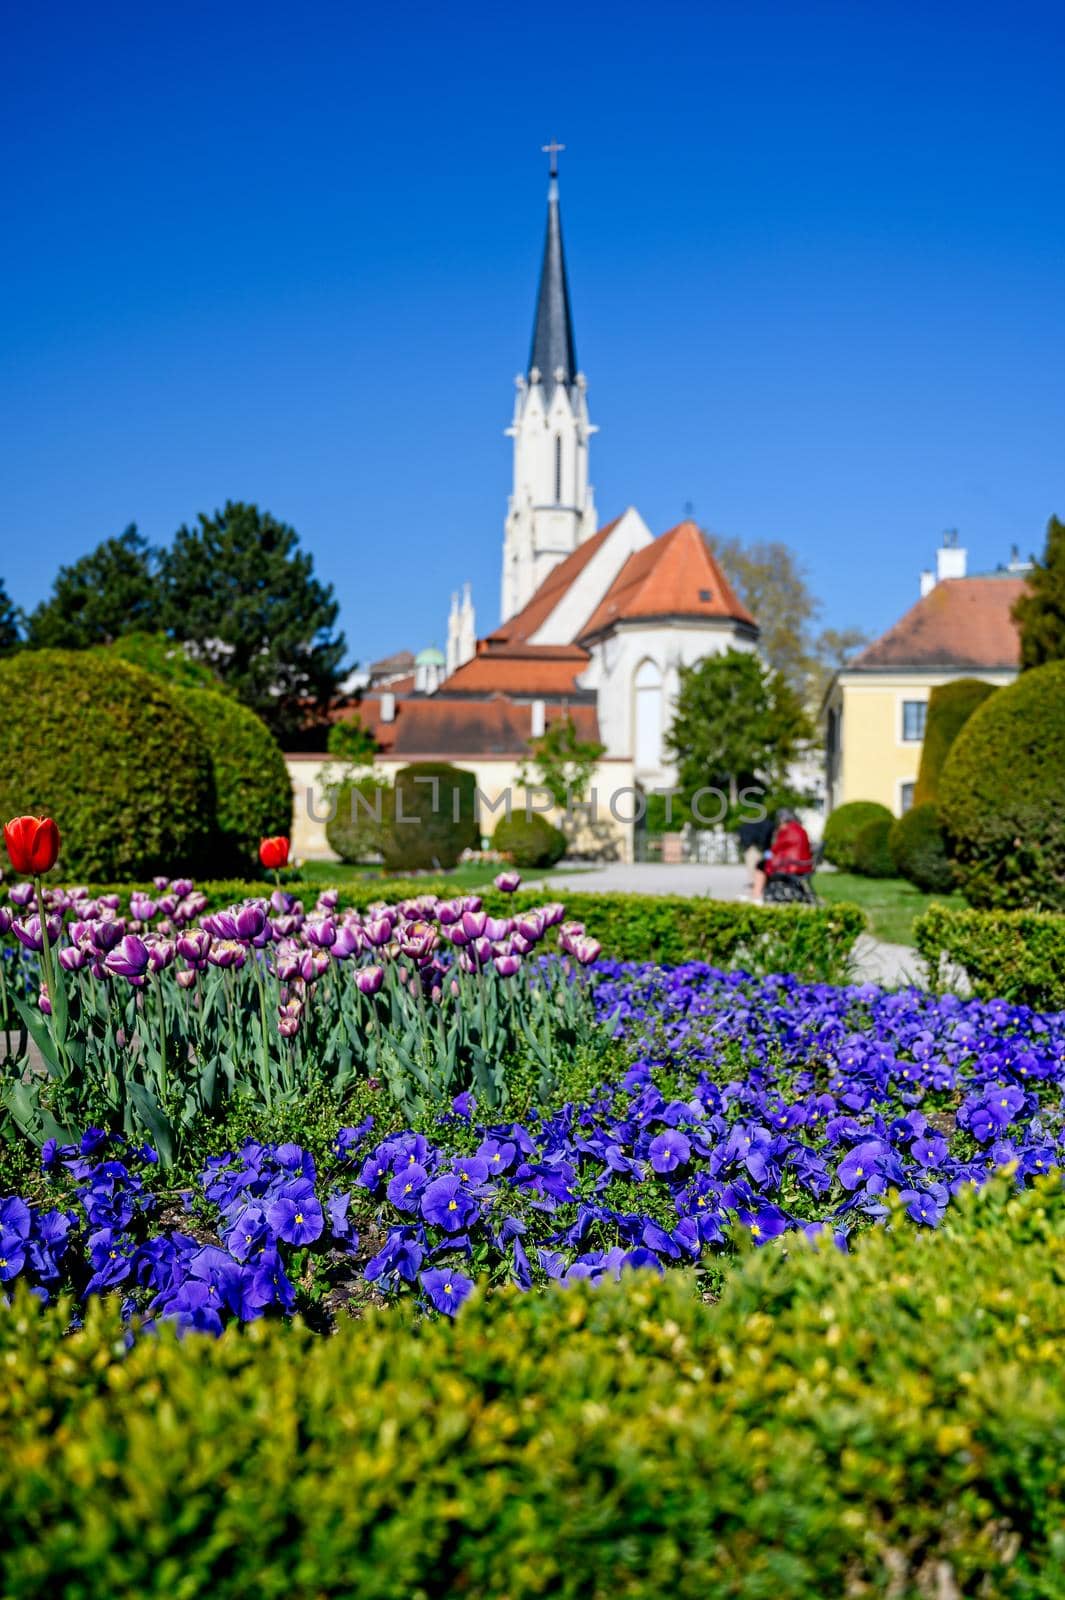 A beautiful well-tended flowerbed with a church in the background.